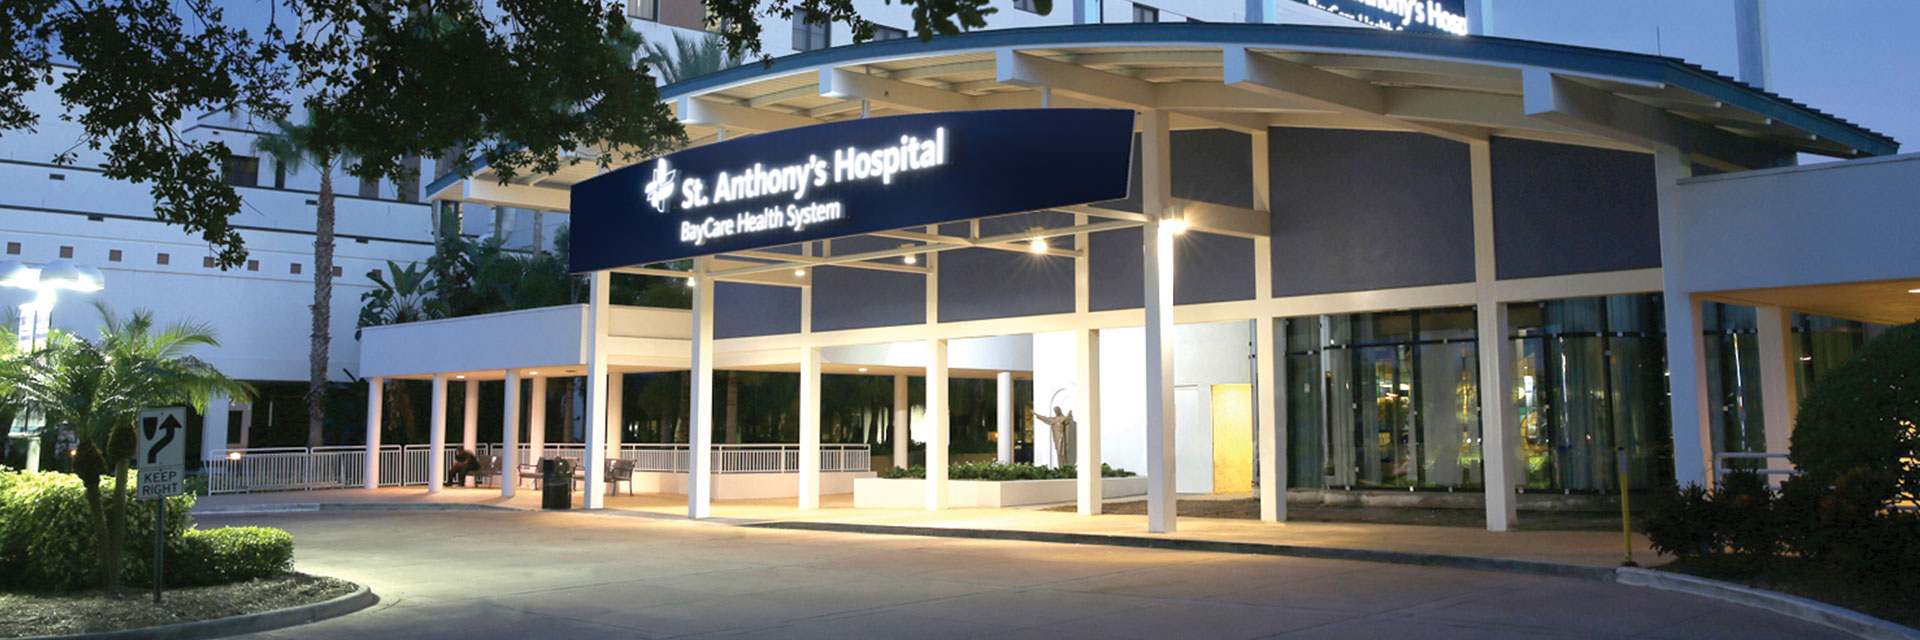 St. Anthony's Hospital main entrance in St. Petersburg